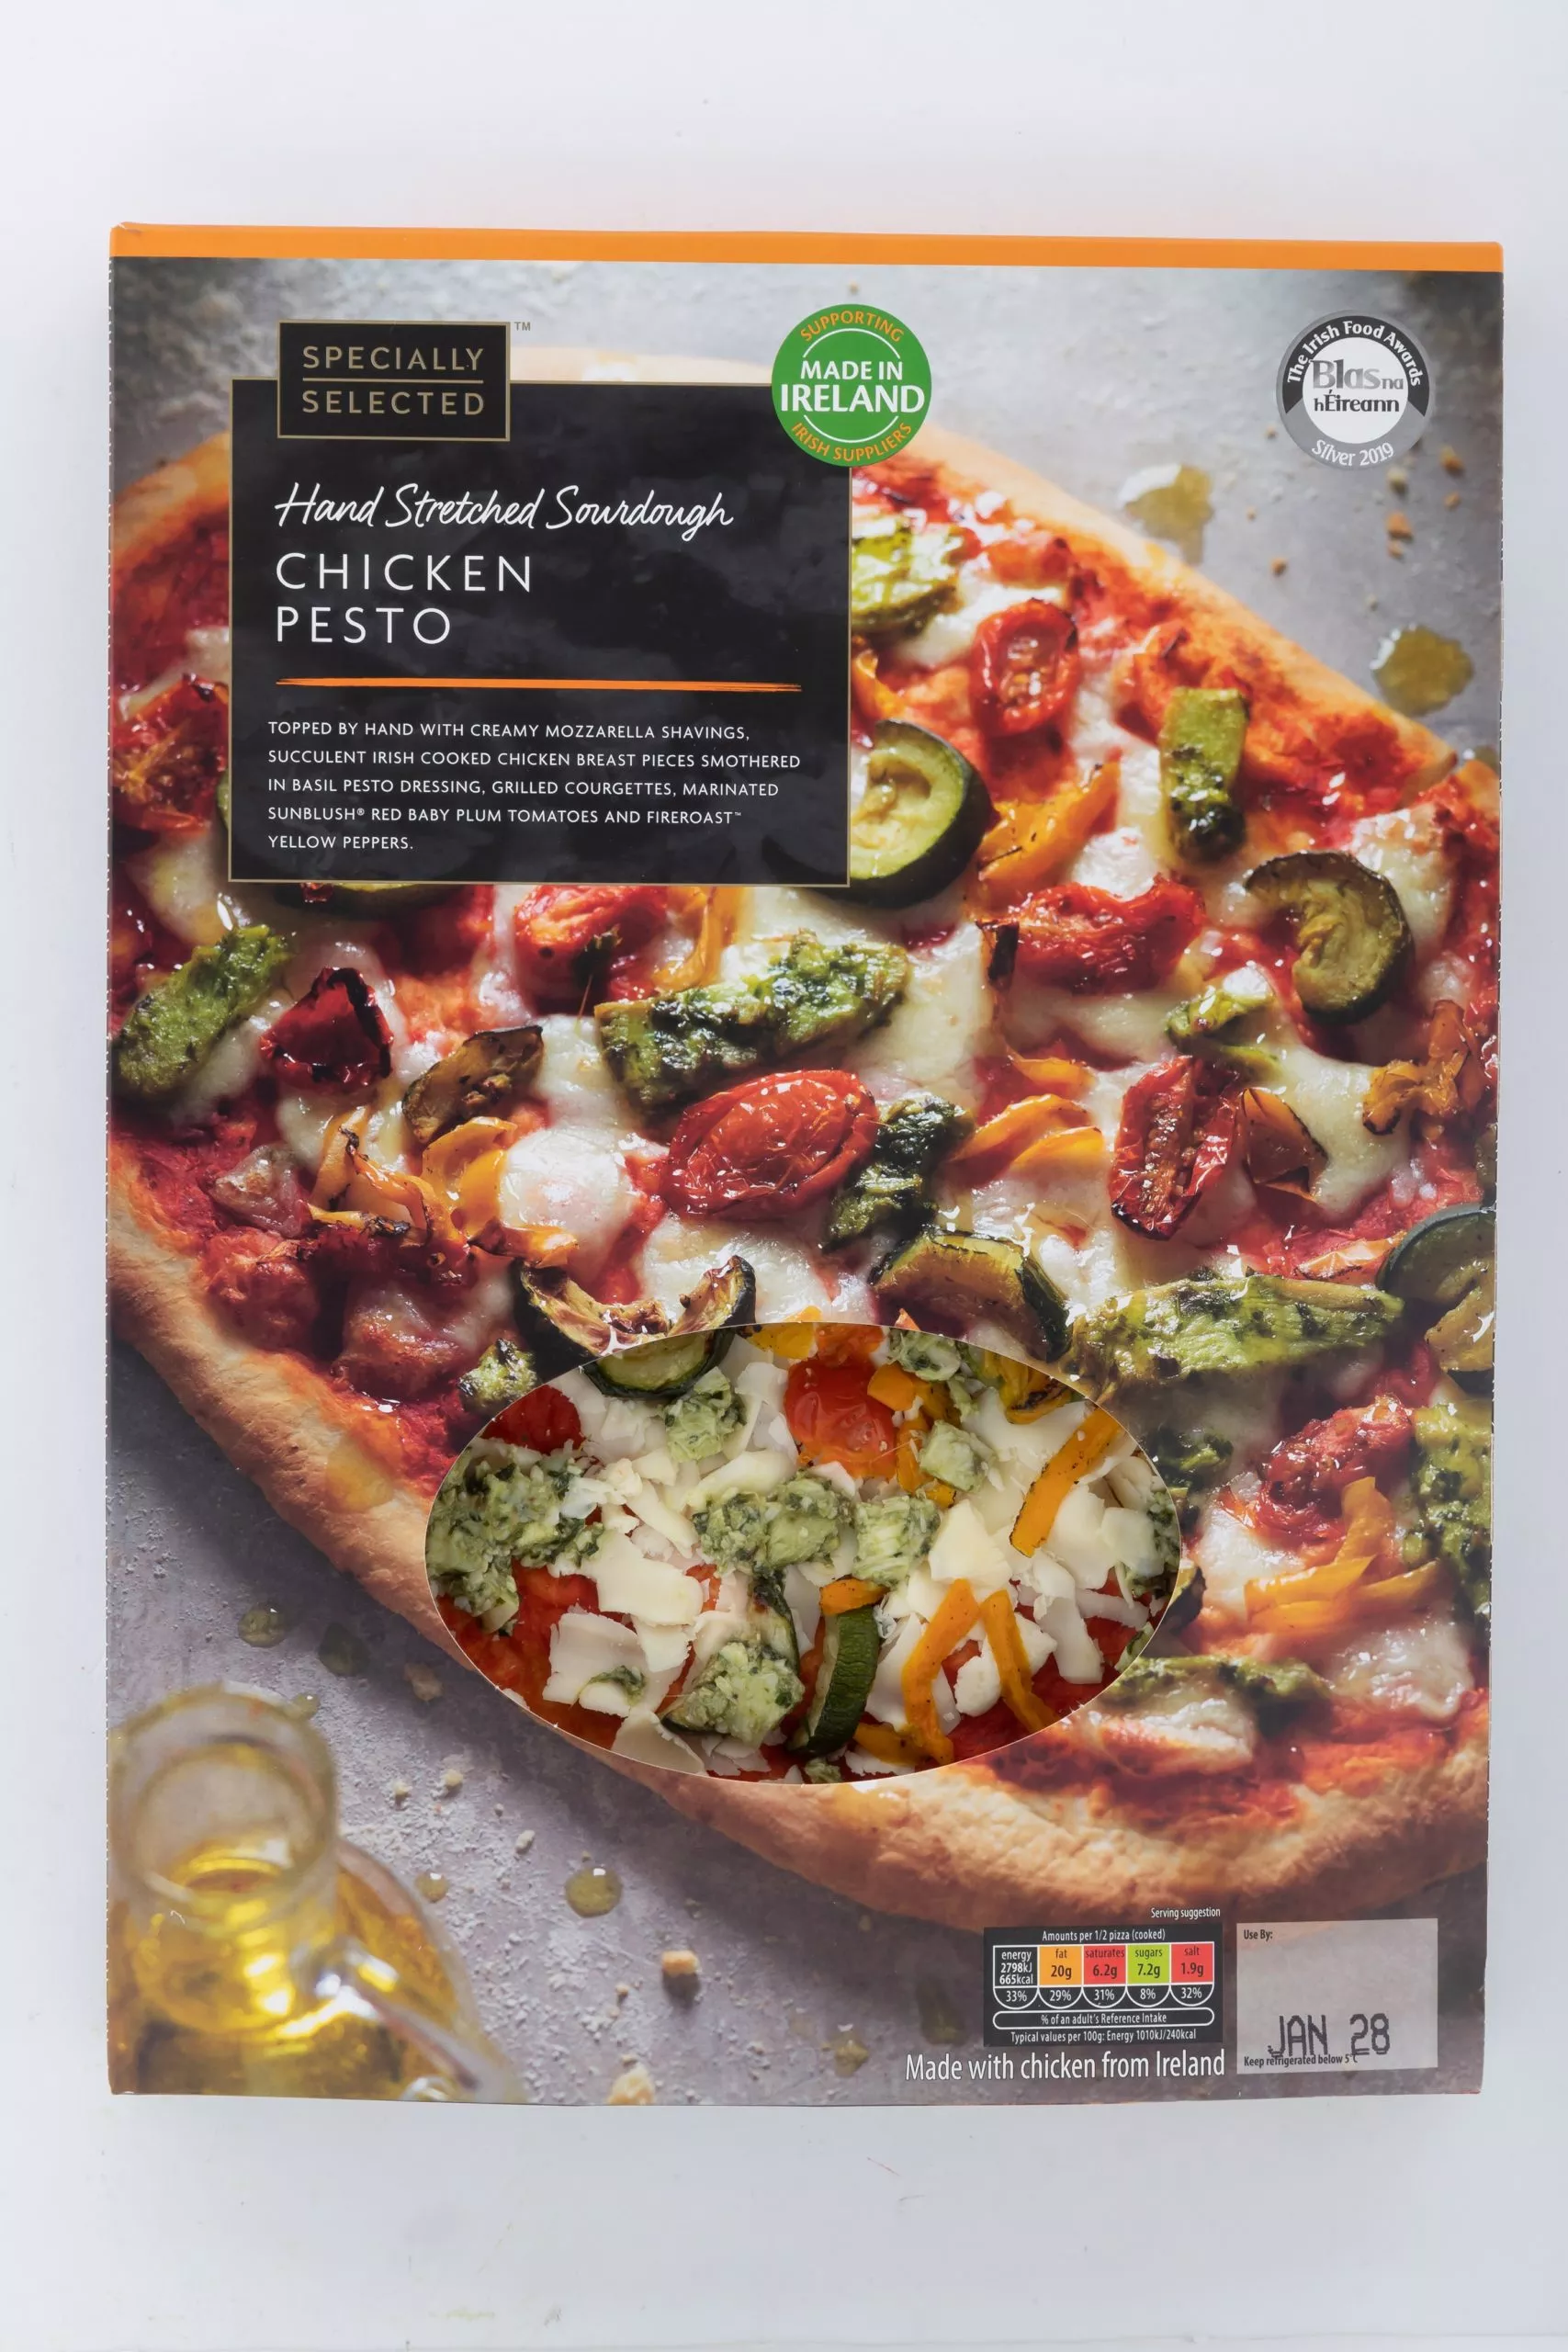 Aldi cuts non-recyclable polystyrene packaging from pizza range